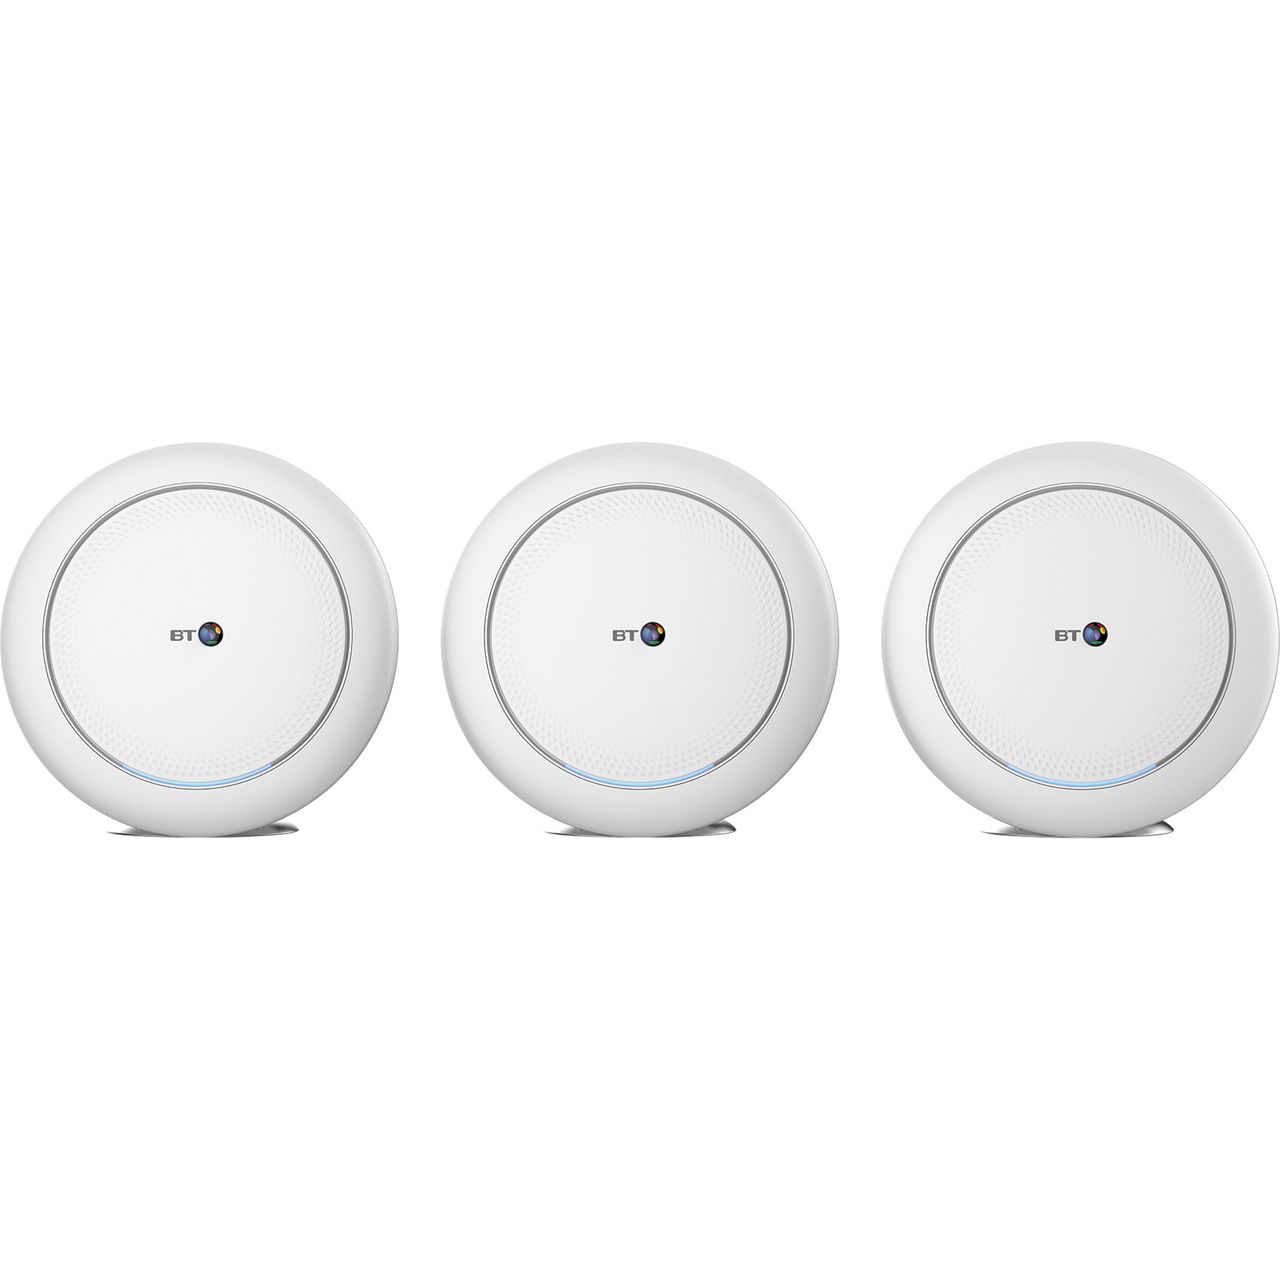 BT Premium Whole Home WiFi (3-Pack) for Mesh Network Review